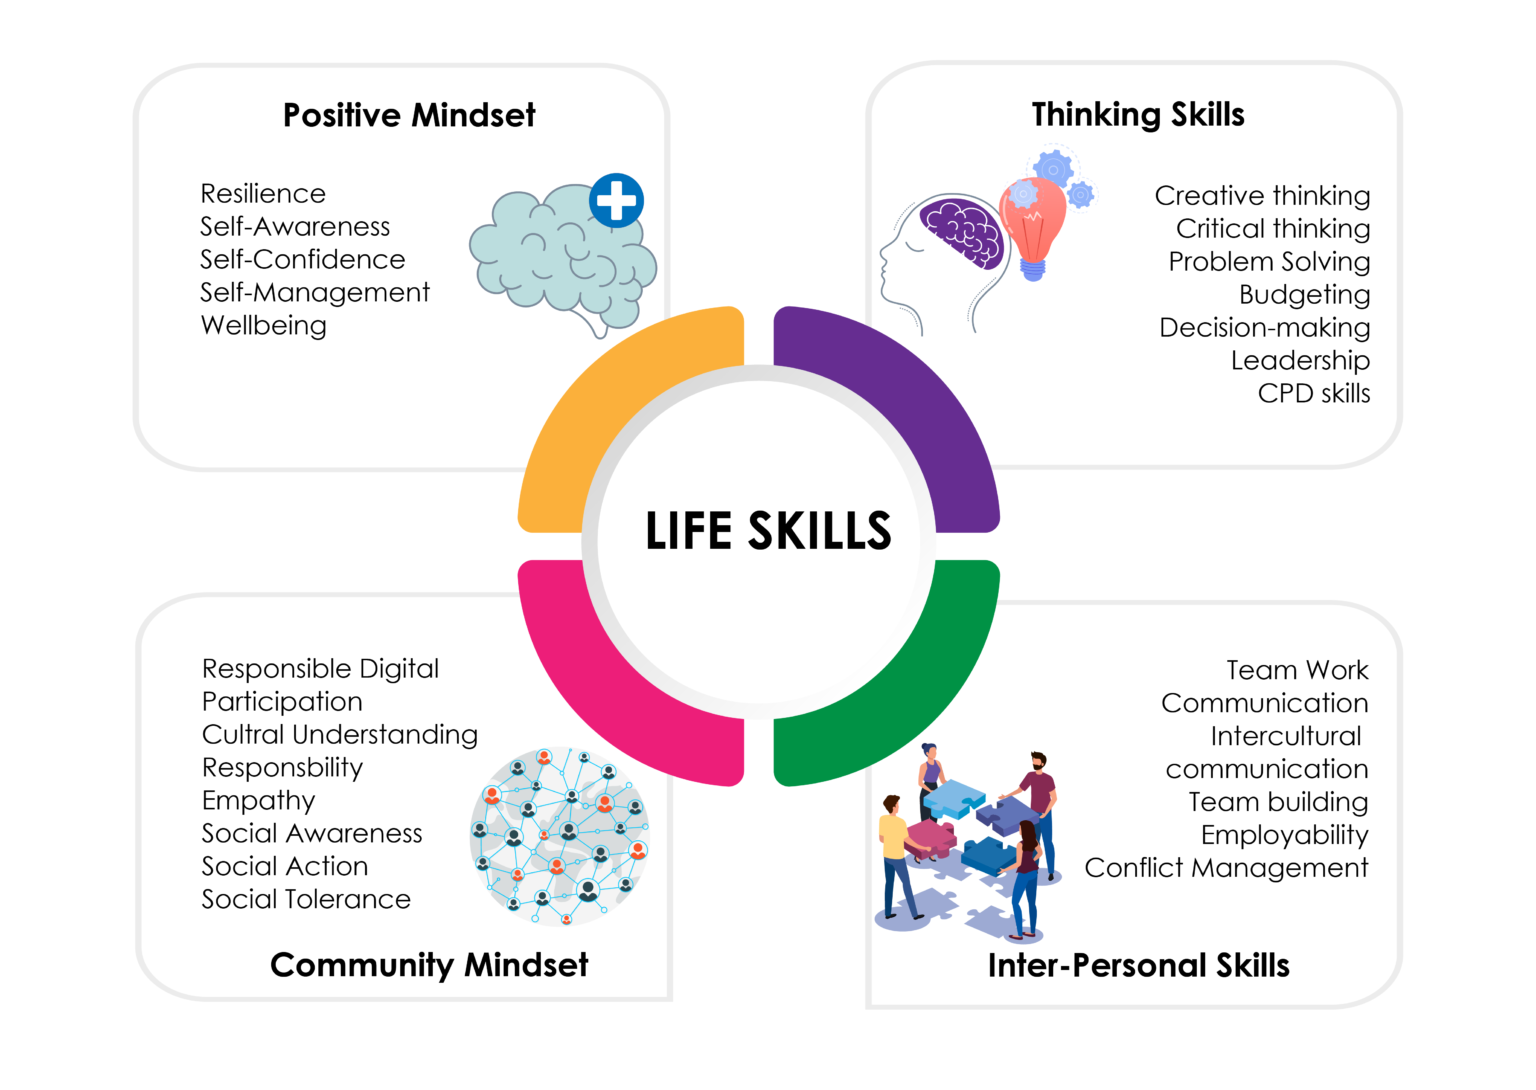 research on life skill education